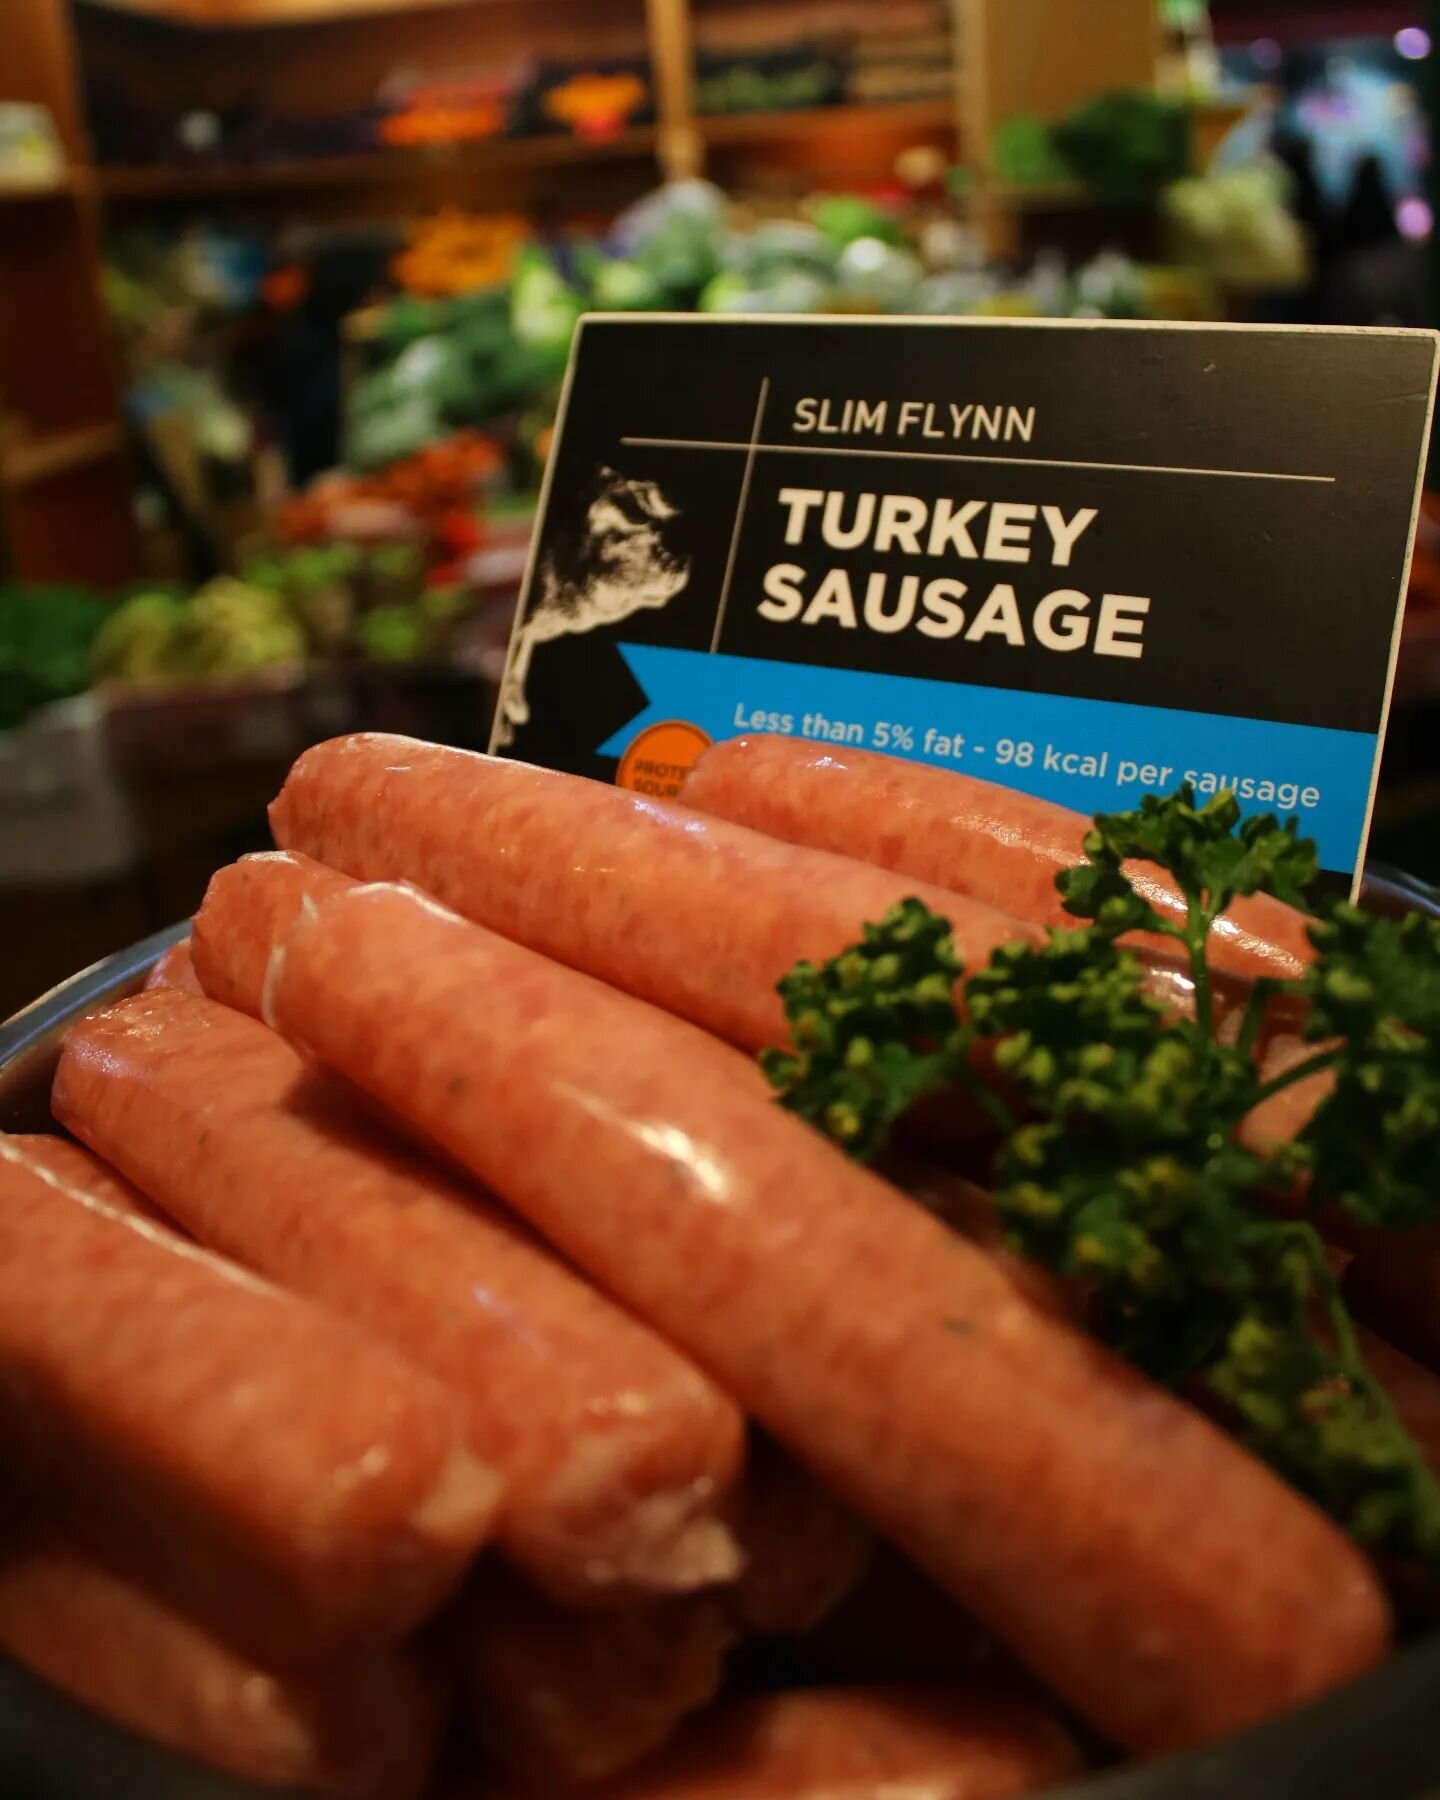 Proper Turkey Sausages🙌

This delicious sausage has less than 5% fat and is ONLY 98 calories per sausage😮&zwj;💨

Exclusive to @theenglishmarketcork🔥

#ProperSausages #Turkey #turkeysausages #lowcalorie #Cork #corkcity #englishmarketcork #englishm